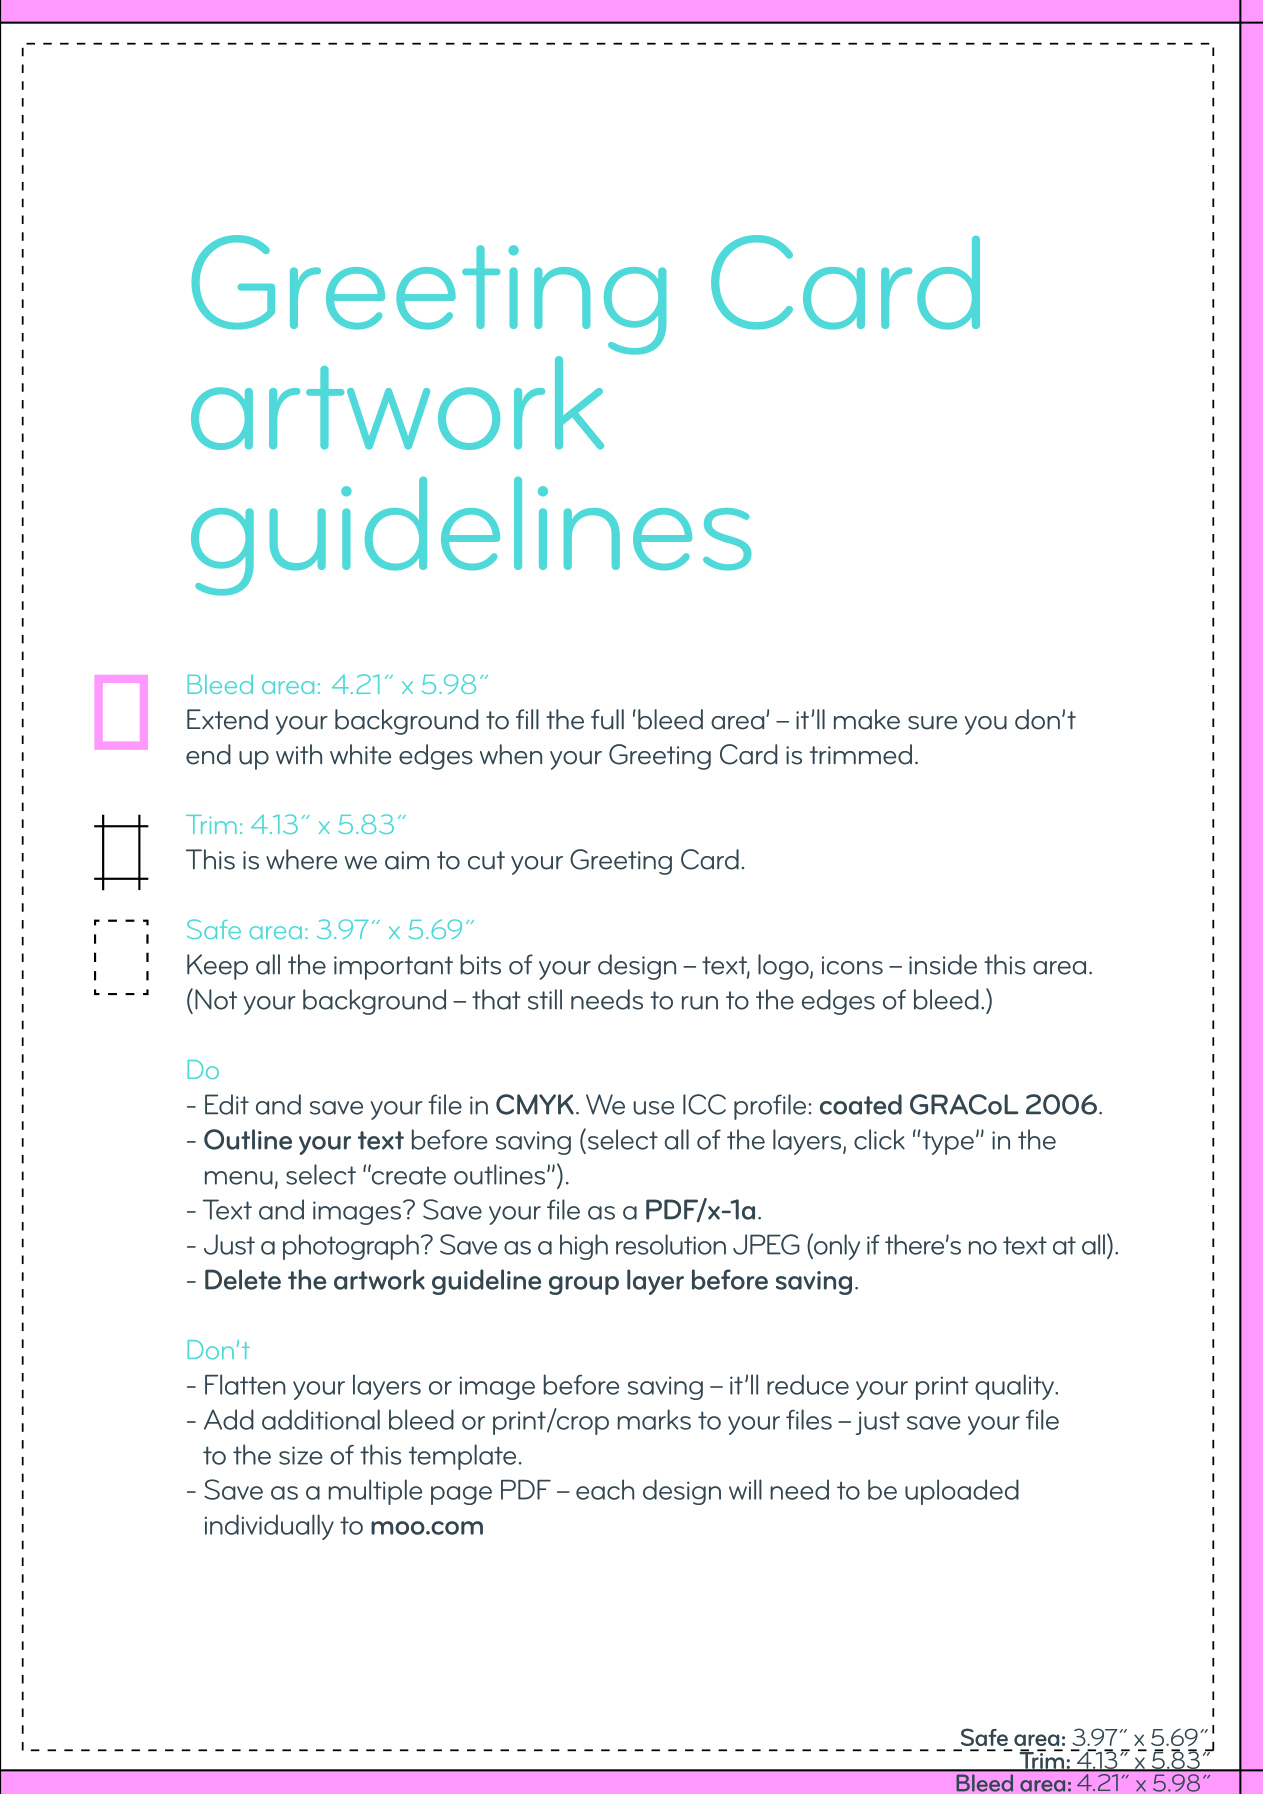 Greeting Card Design Guidelines & Artwork Templates | Moo Pertaining To Birthday Card Template Indesign